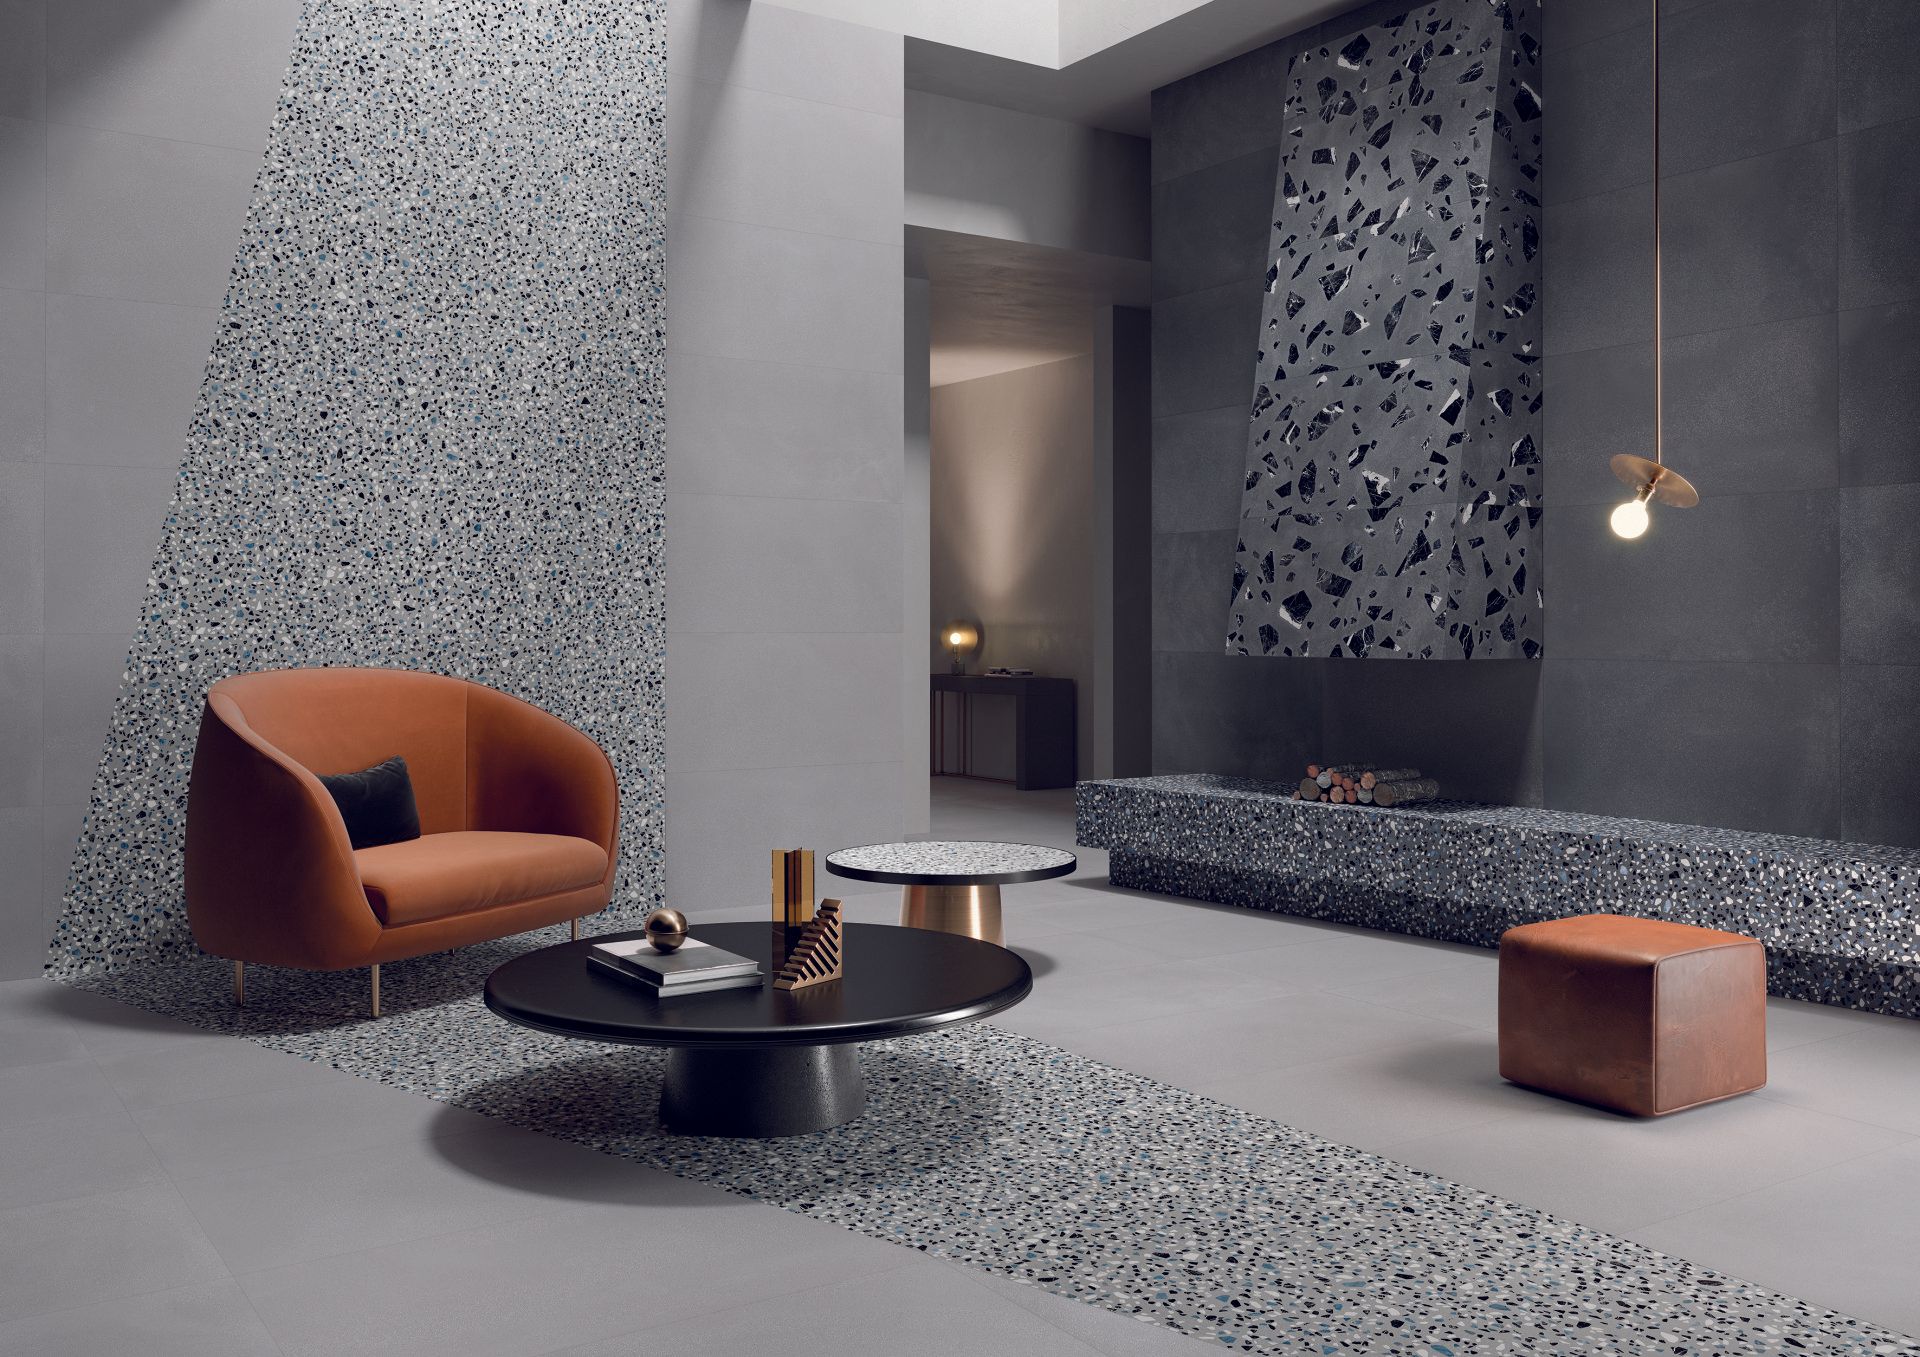 terrazzo tiles, dark terrazzo  with a leather cushion and chair